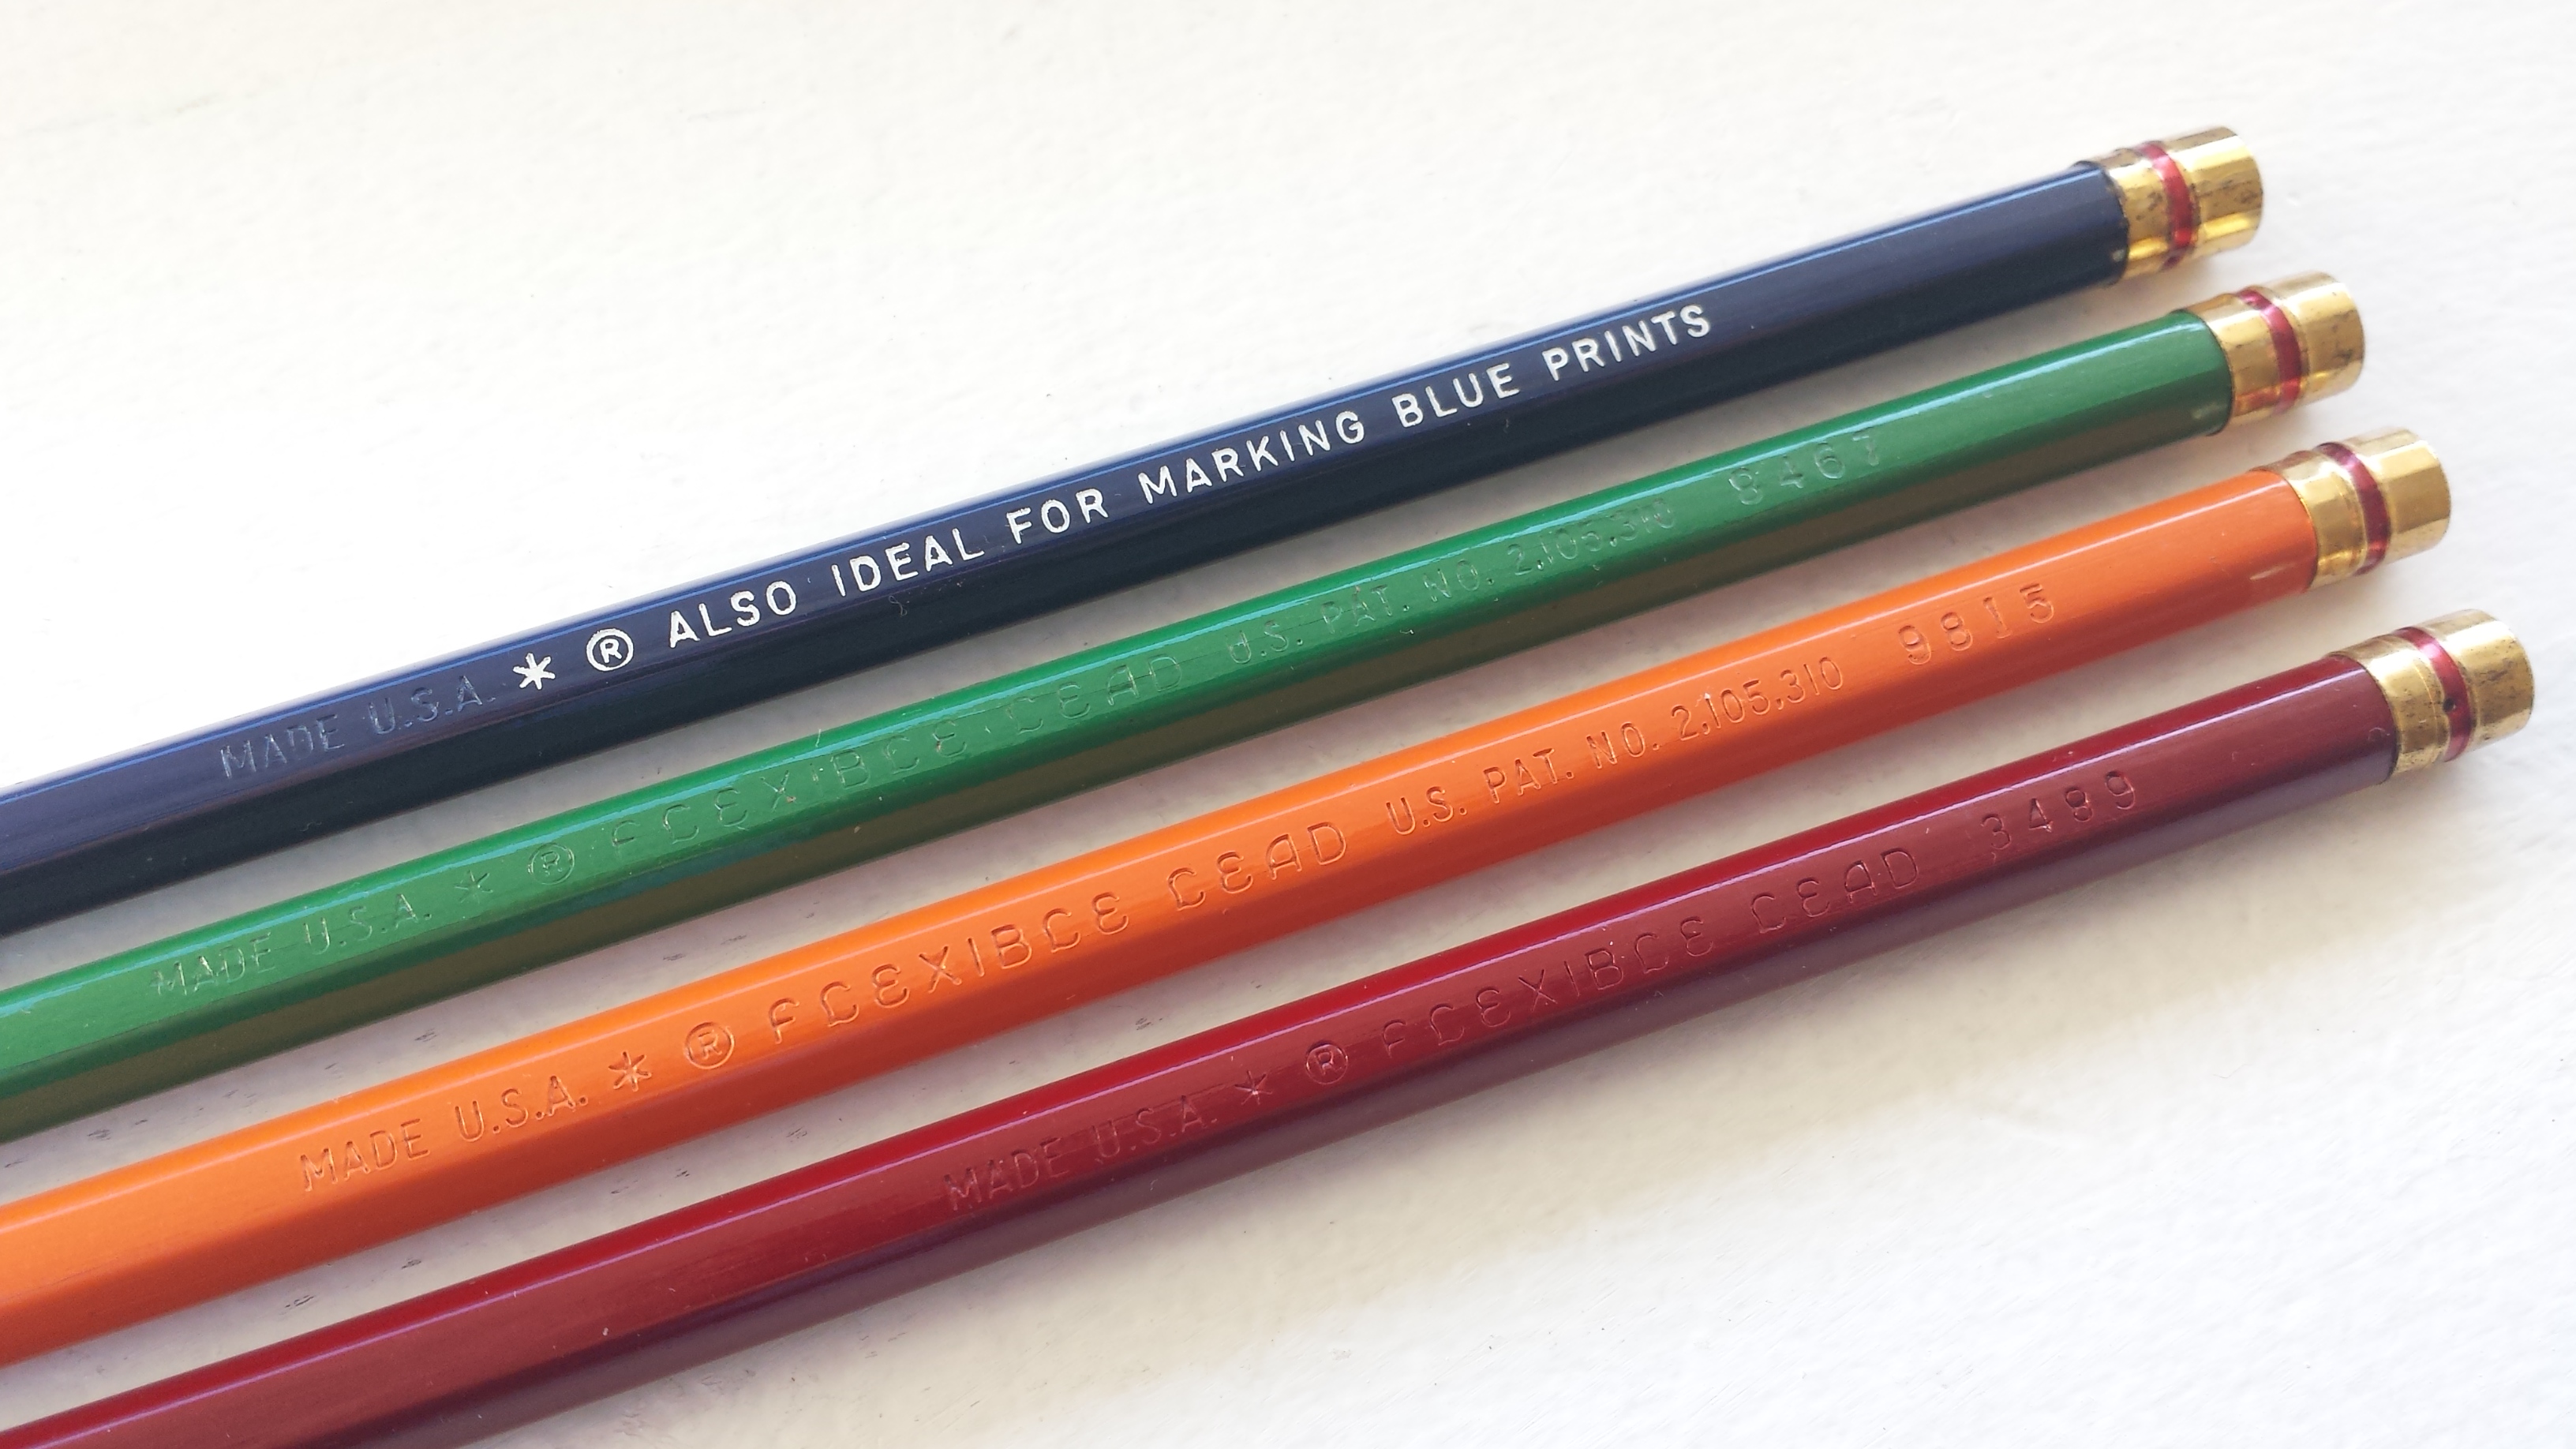 Eagle Verithin Colored Pencils – pencils and other things